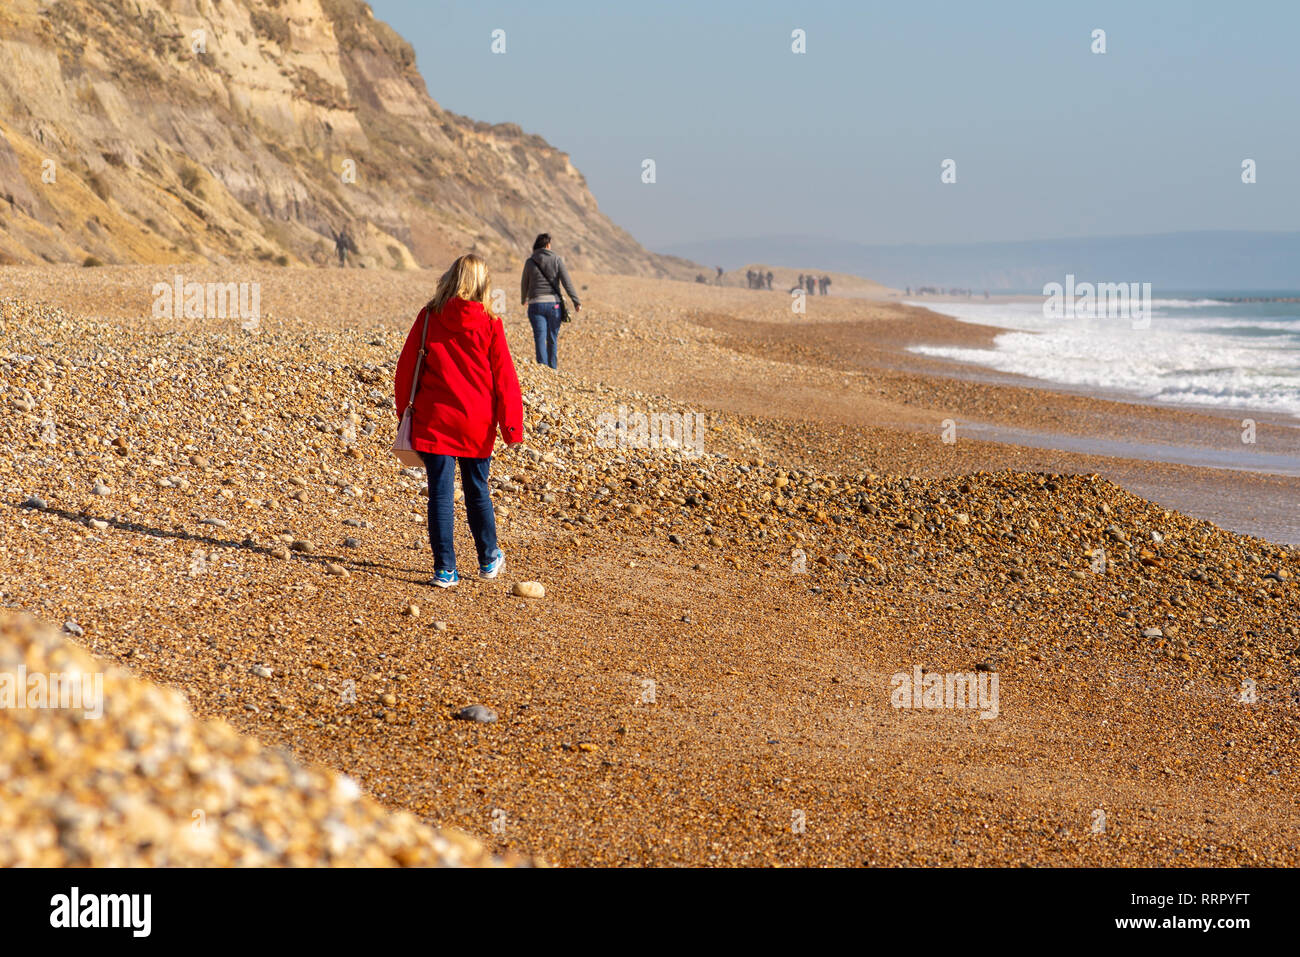 People walking along the pebbly beach at Hengistbury Head, Christchurch, Dorset, England, UK, warm February sunshine, 2019. Woman in a red coat. Stock Photo